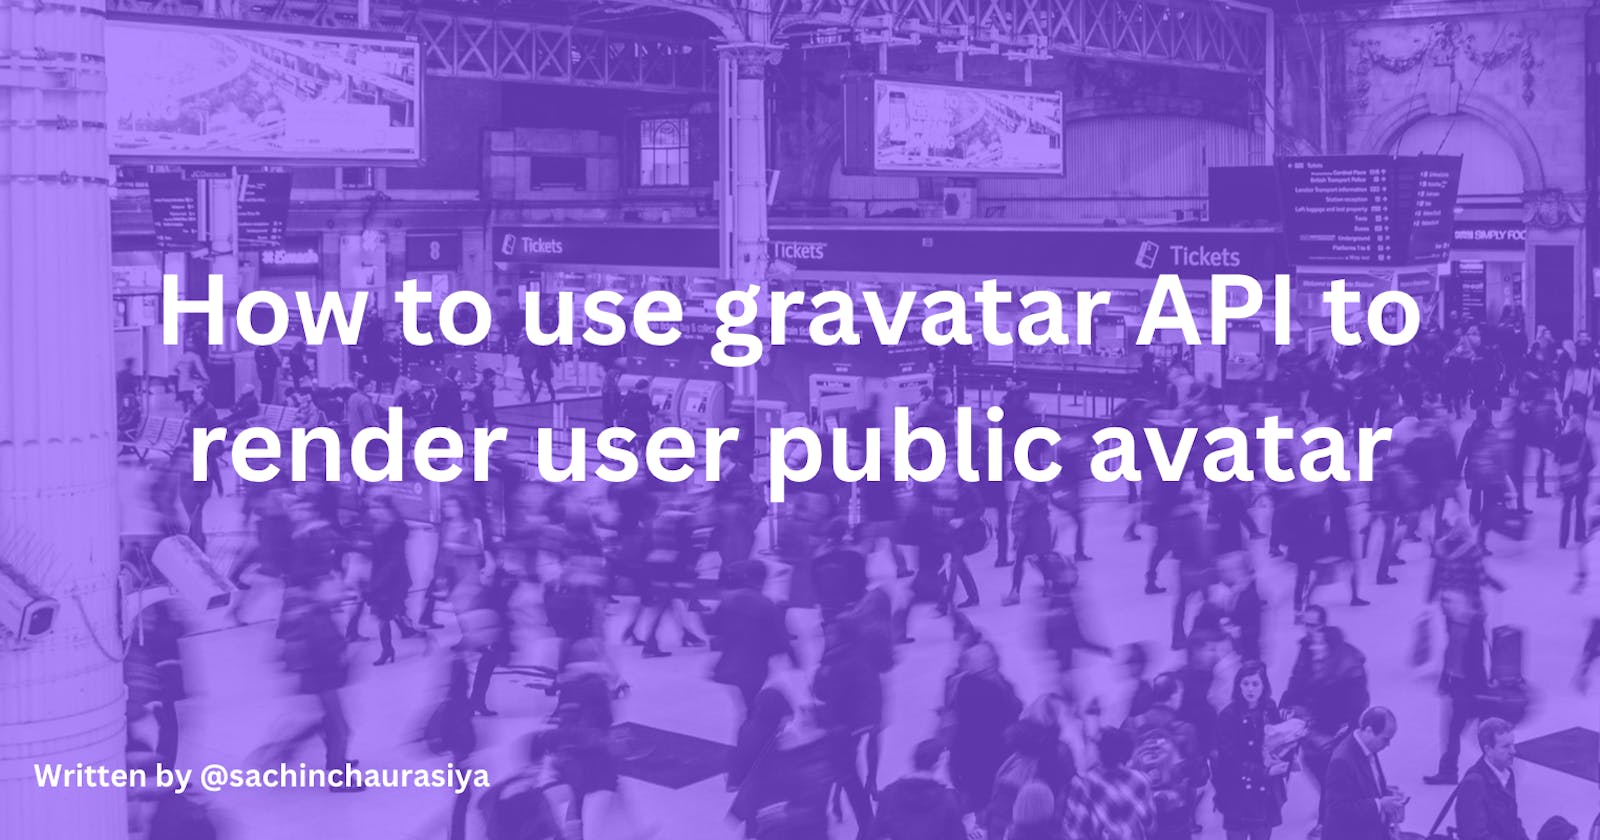 How to use gravatar API to render user public avatar